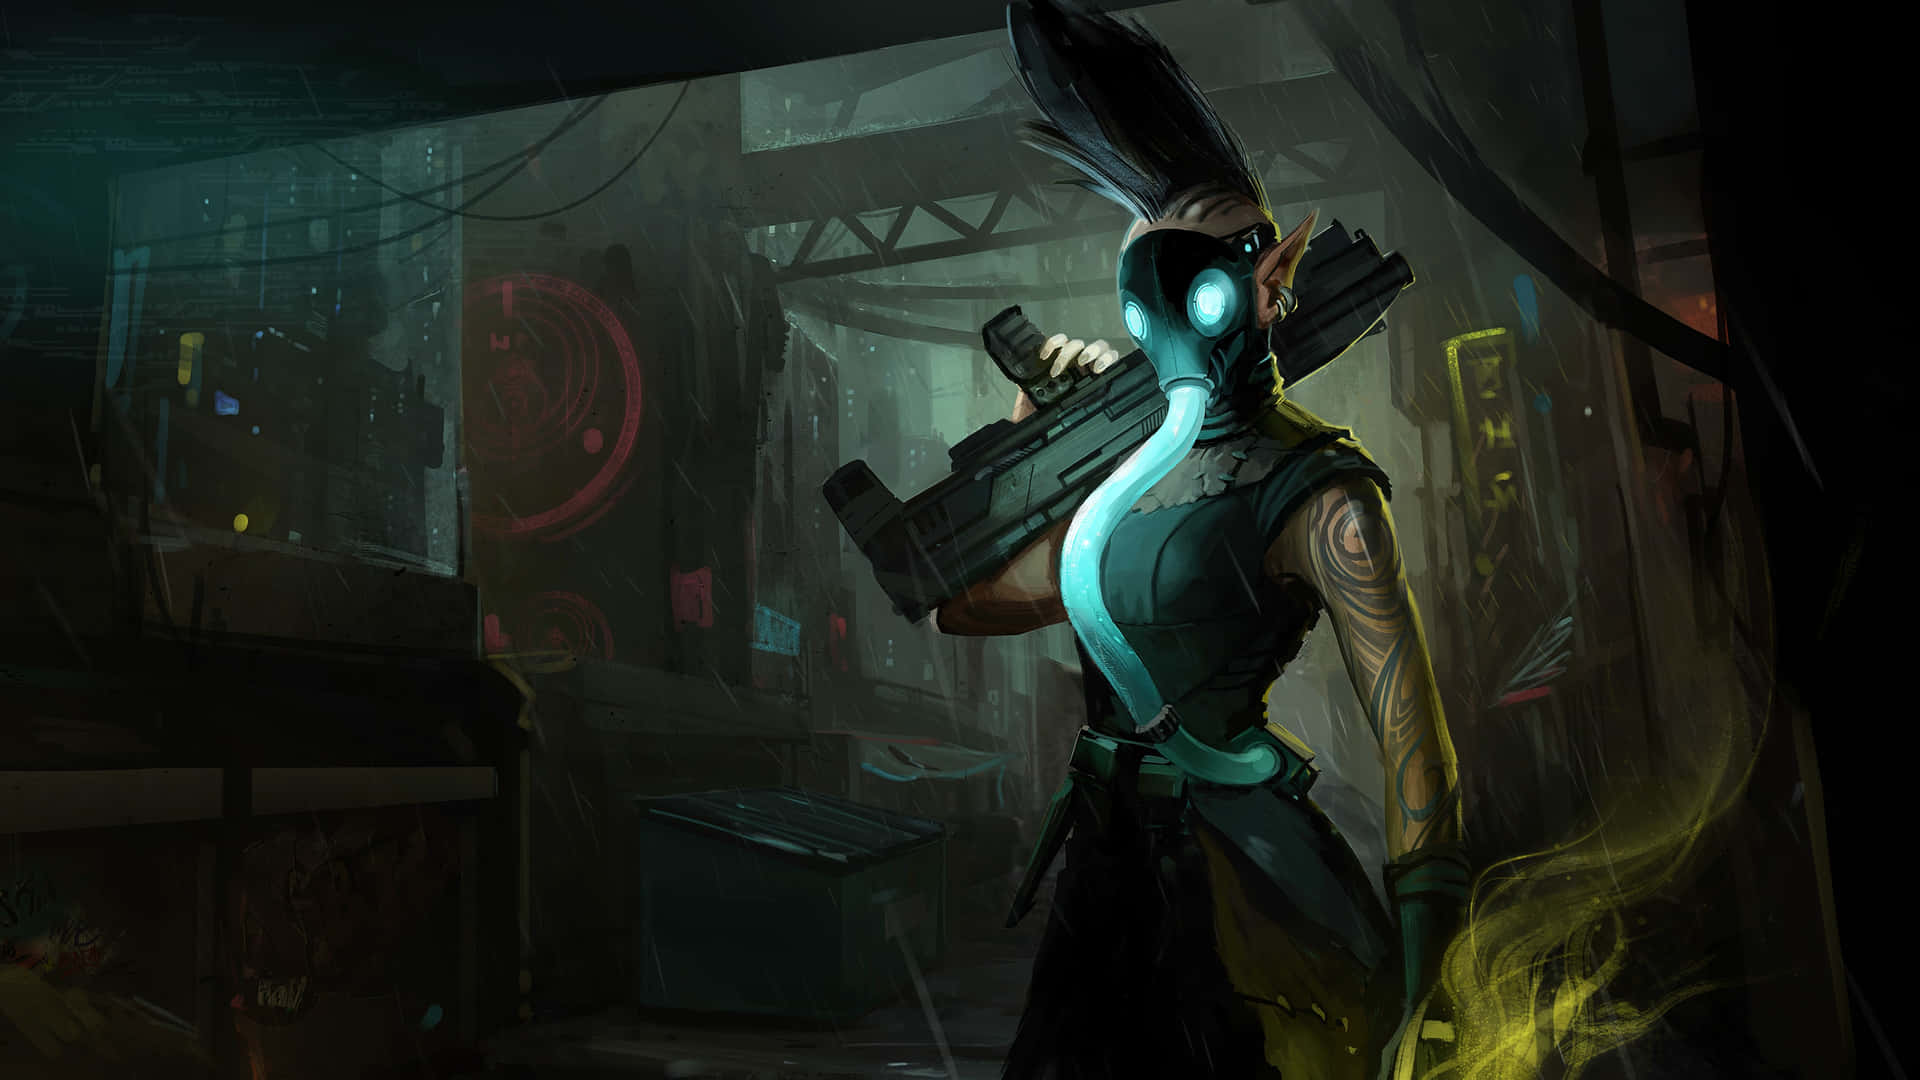 Dive into the Shadowrun Wallpaper